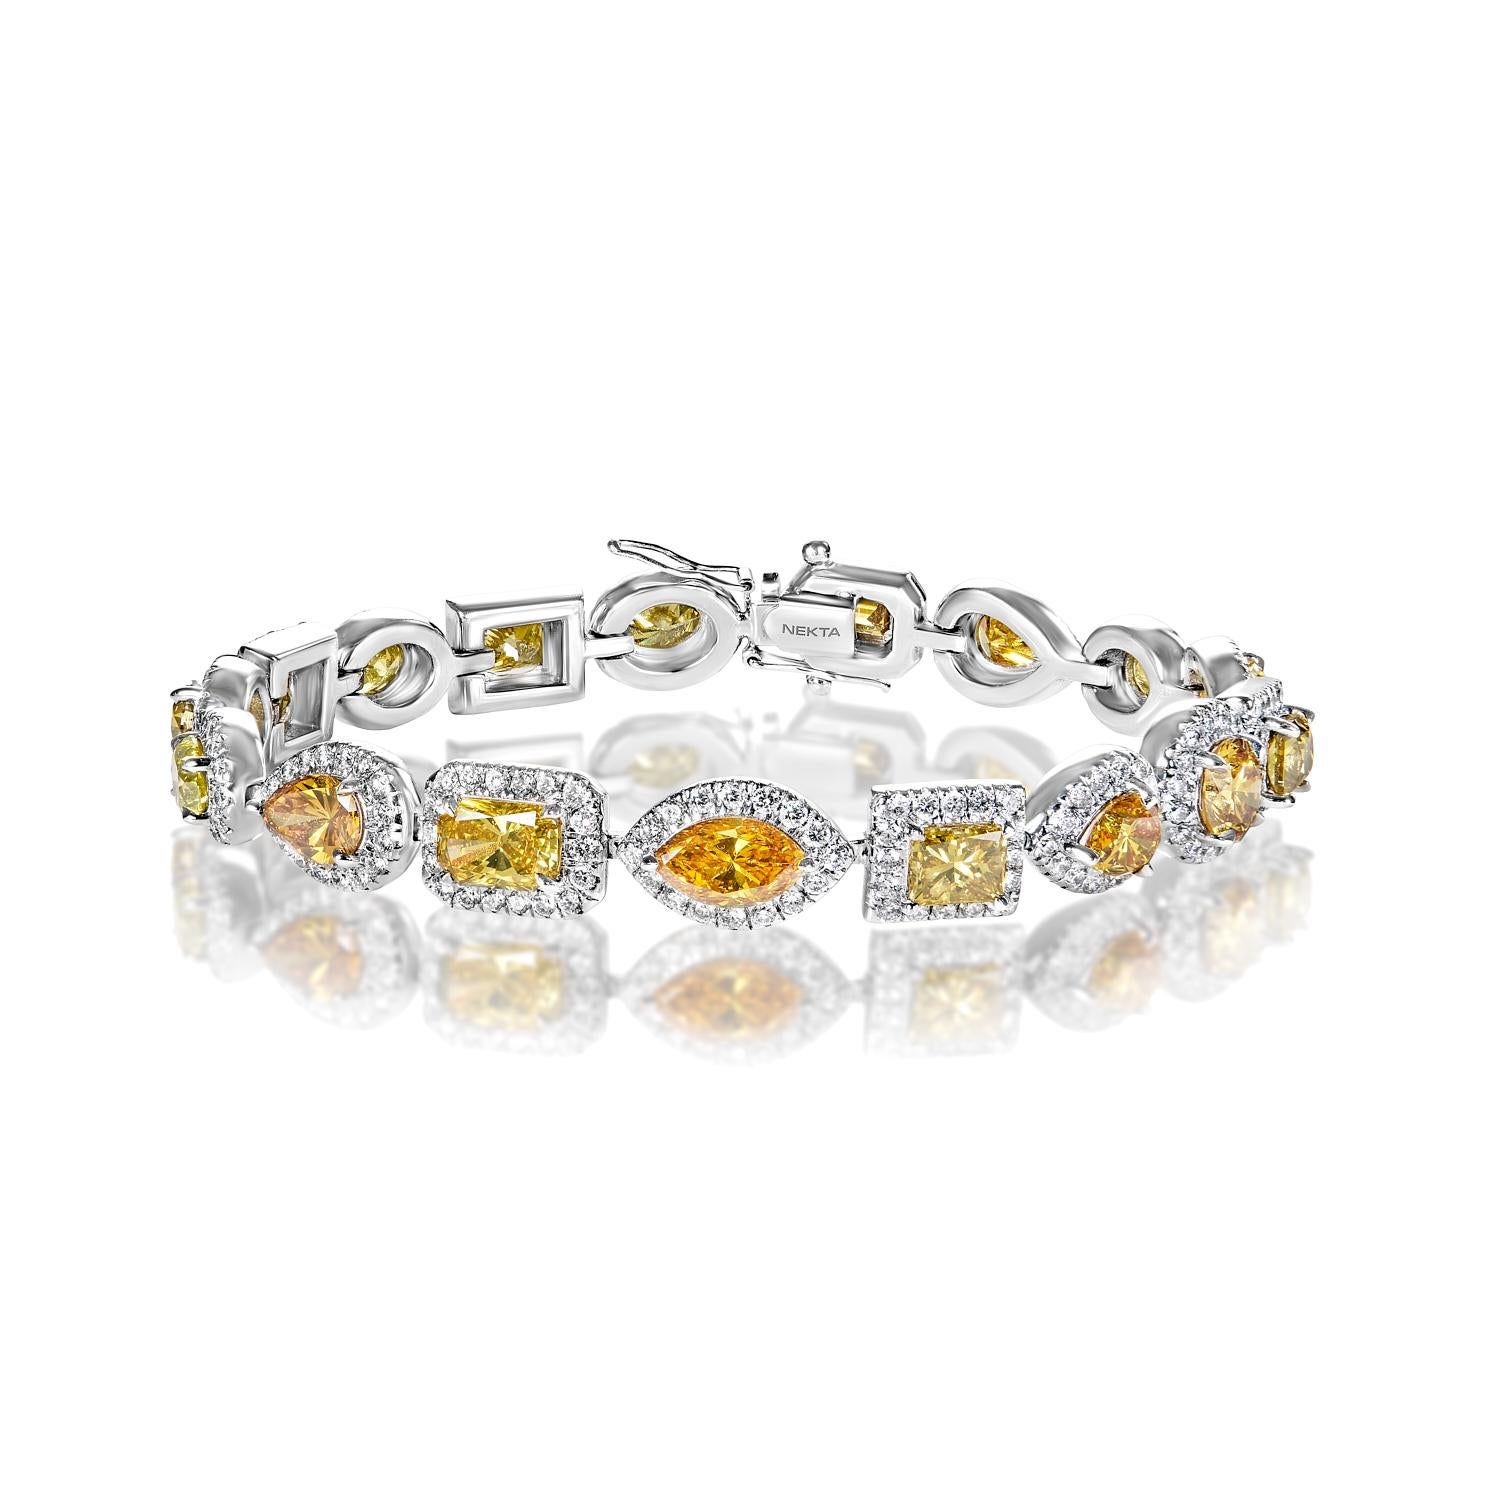 The COLETTE 20.14 Carat Diamond Single Row Bracelet features COMBINE MIX SHAPE DIAMONDS brilliants weighing a total of approximately 20.14 carats, set in 18K White Gold.

Style:
Main Diamonds:
Diamond Size: 15.87 Carats
Color: FANCY Yellow*
Diamond